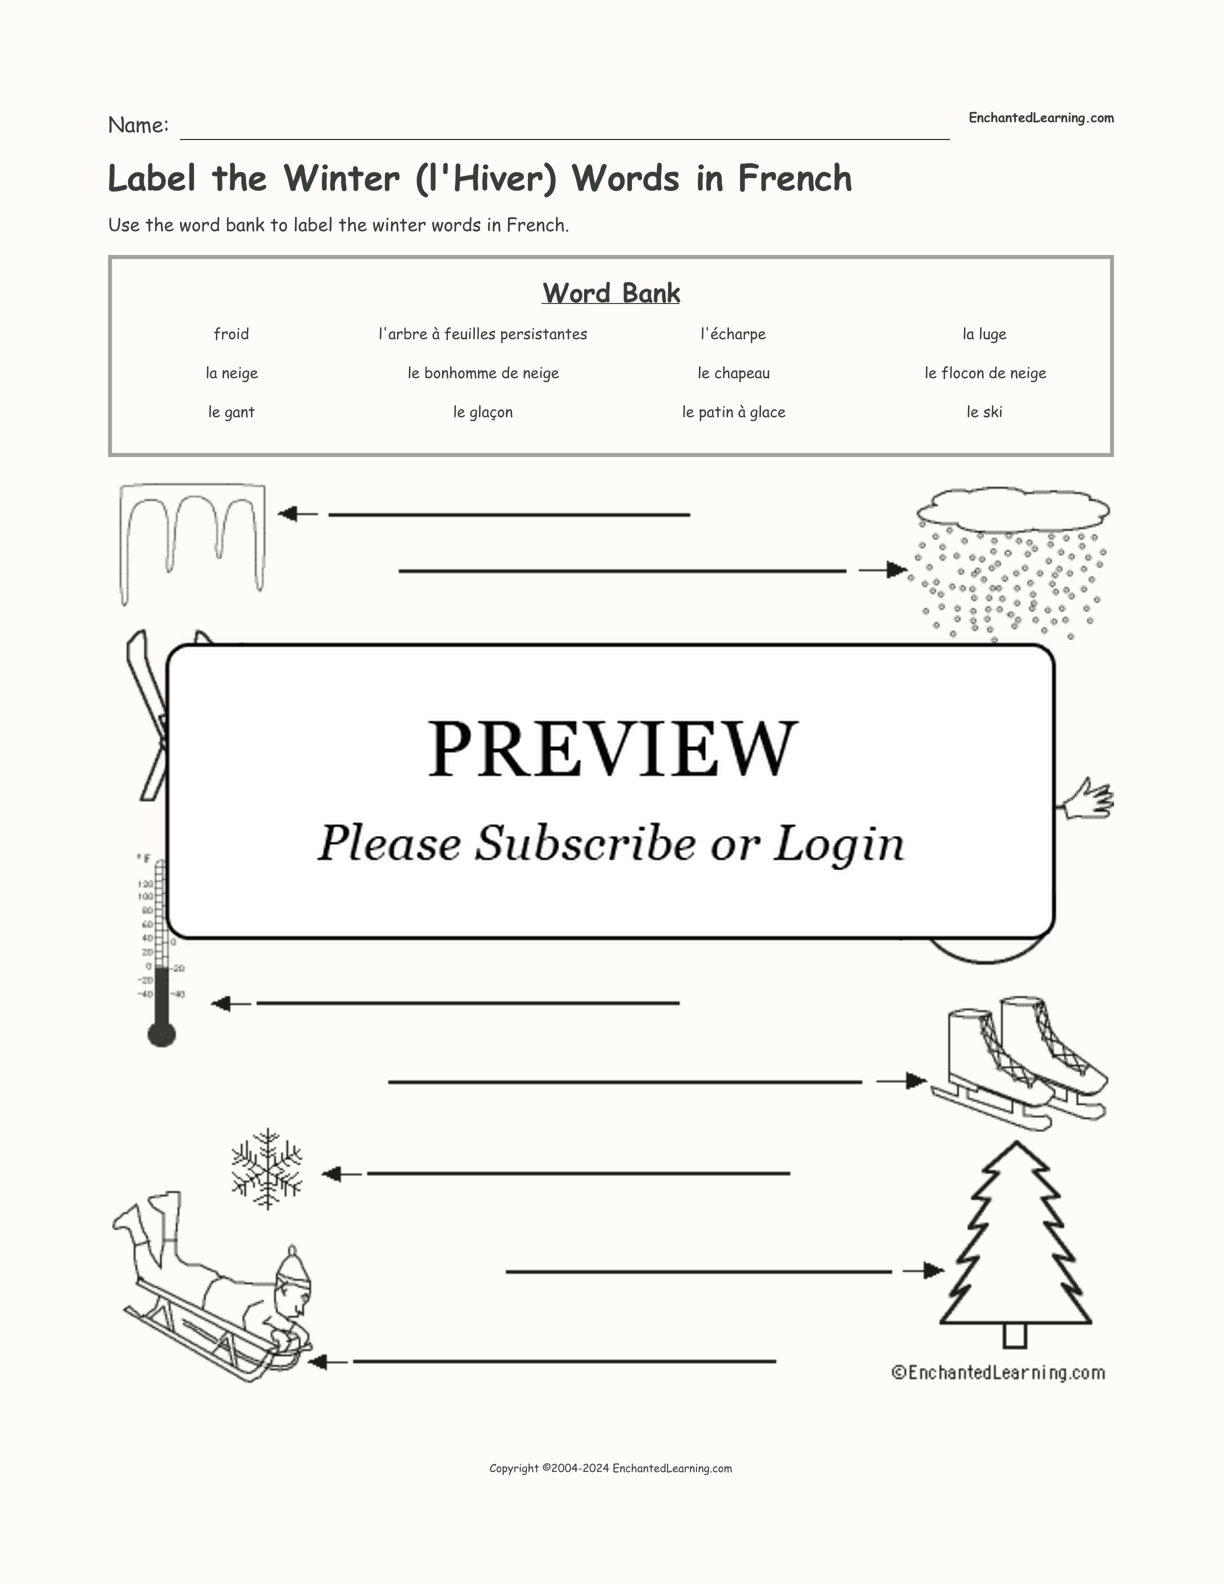 Label the Winter (l'Hiver) Words in French interactive worksheet page 1